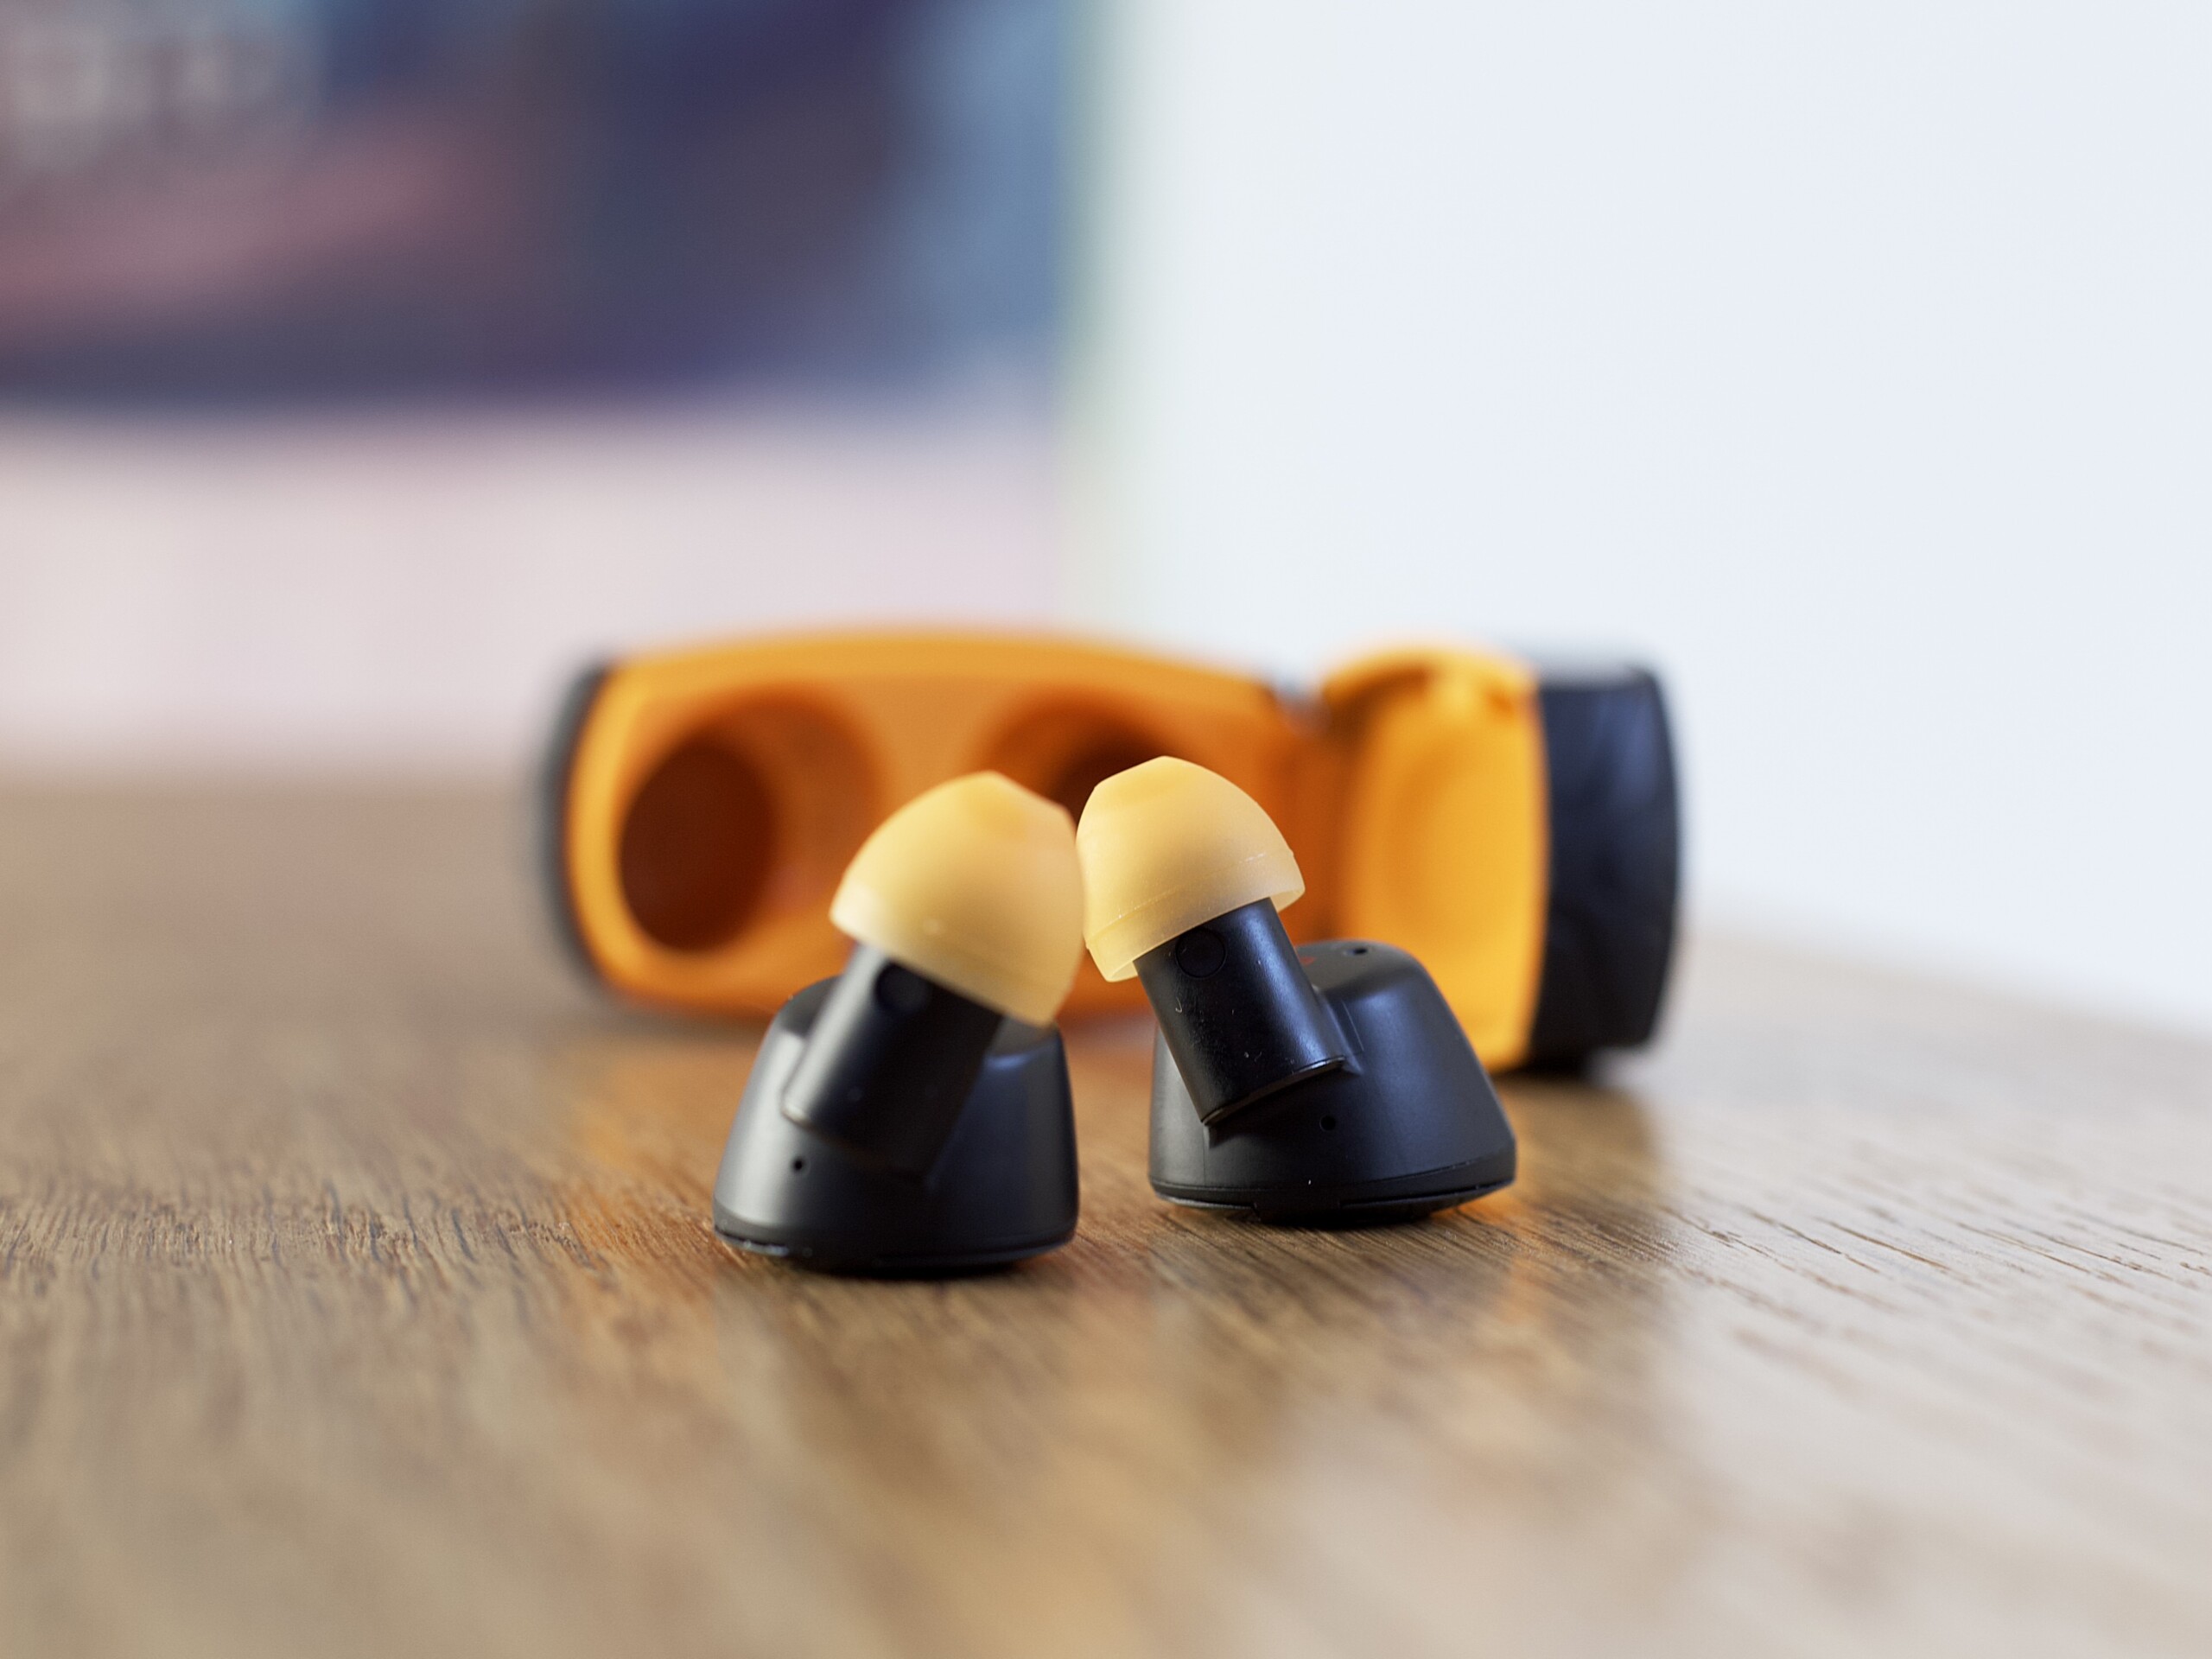 Xiaomi Mi True- Earbuds Basic 2, Ecouteur intra-Auriculaire, Bluetooth 5.0  – MADON